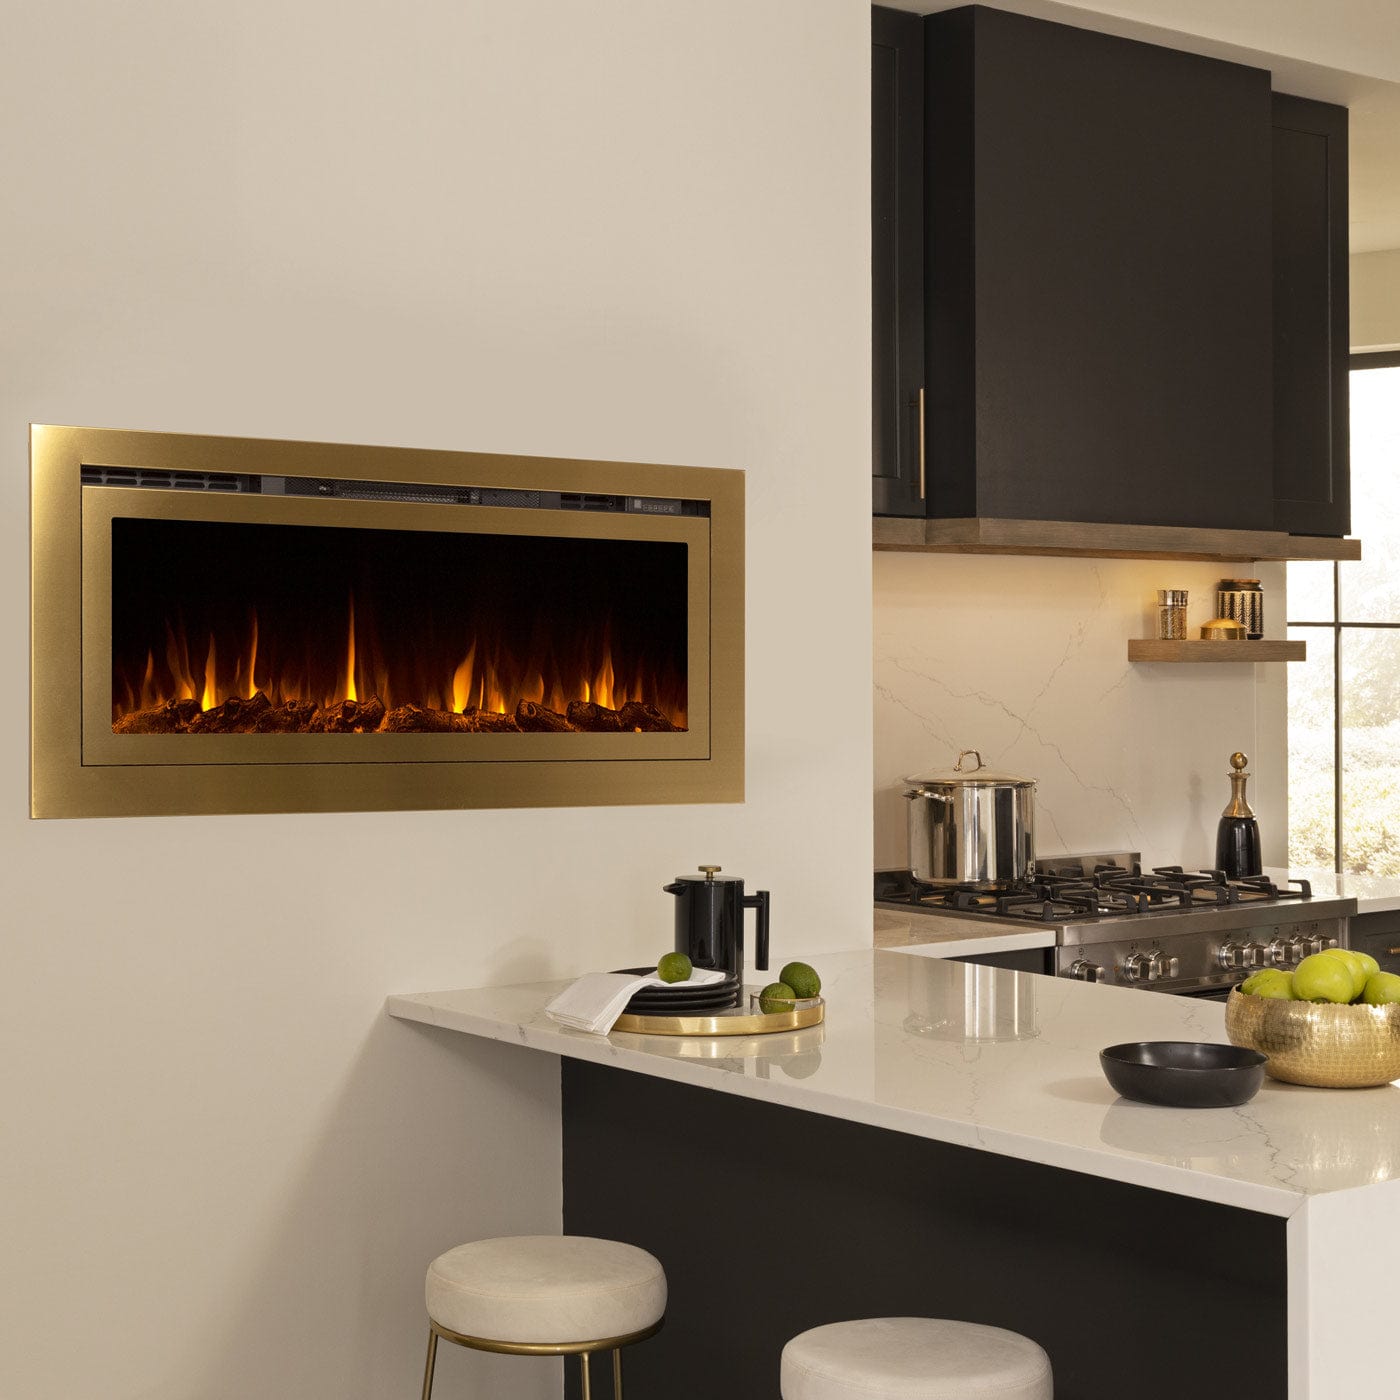 Touchstone Sideline Gold 86276 Smart Electric Fireplace in kitchen with gold accents